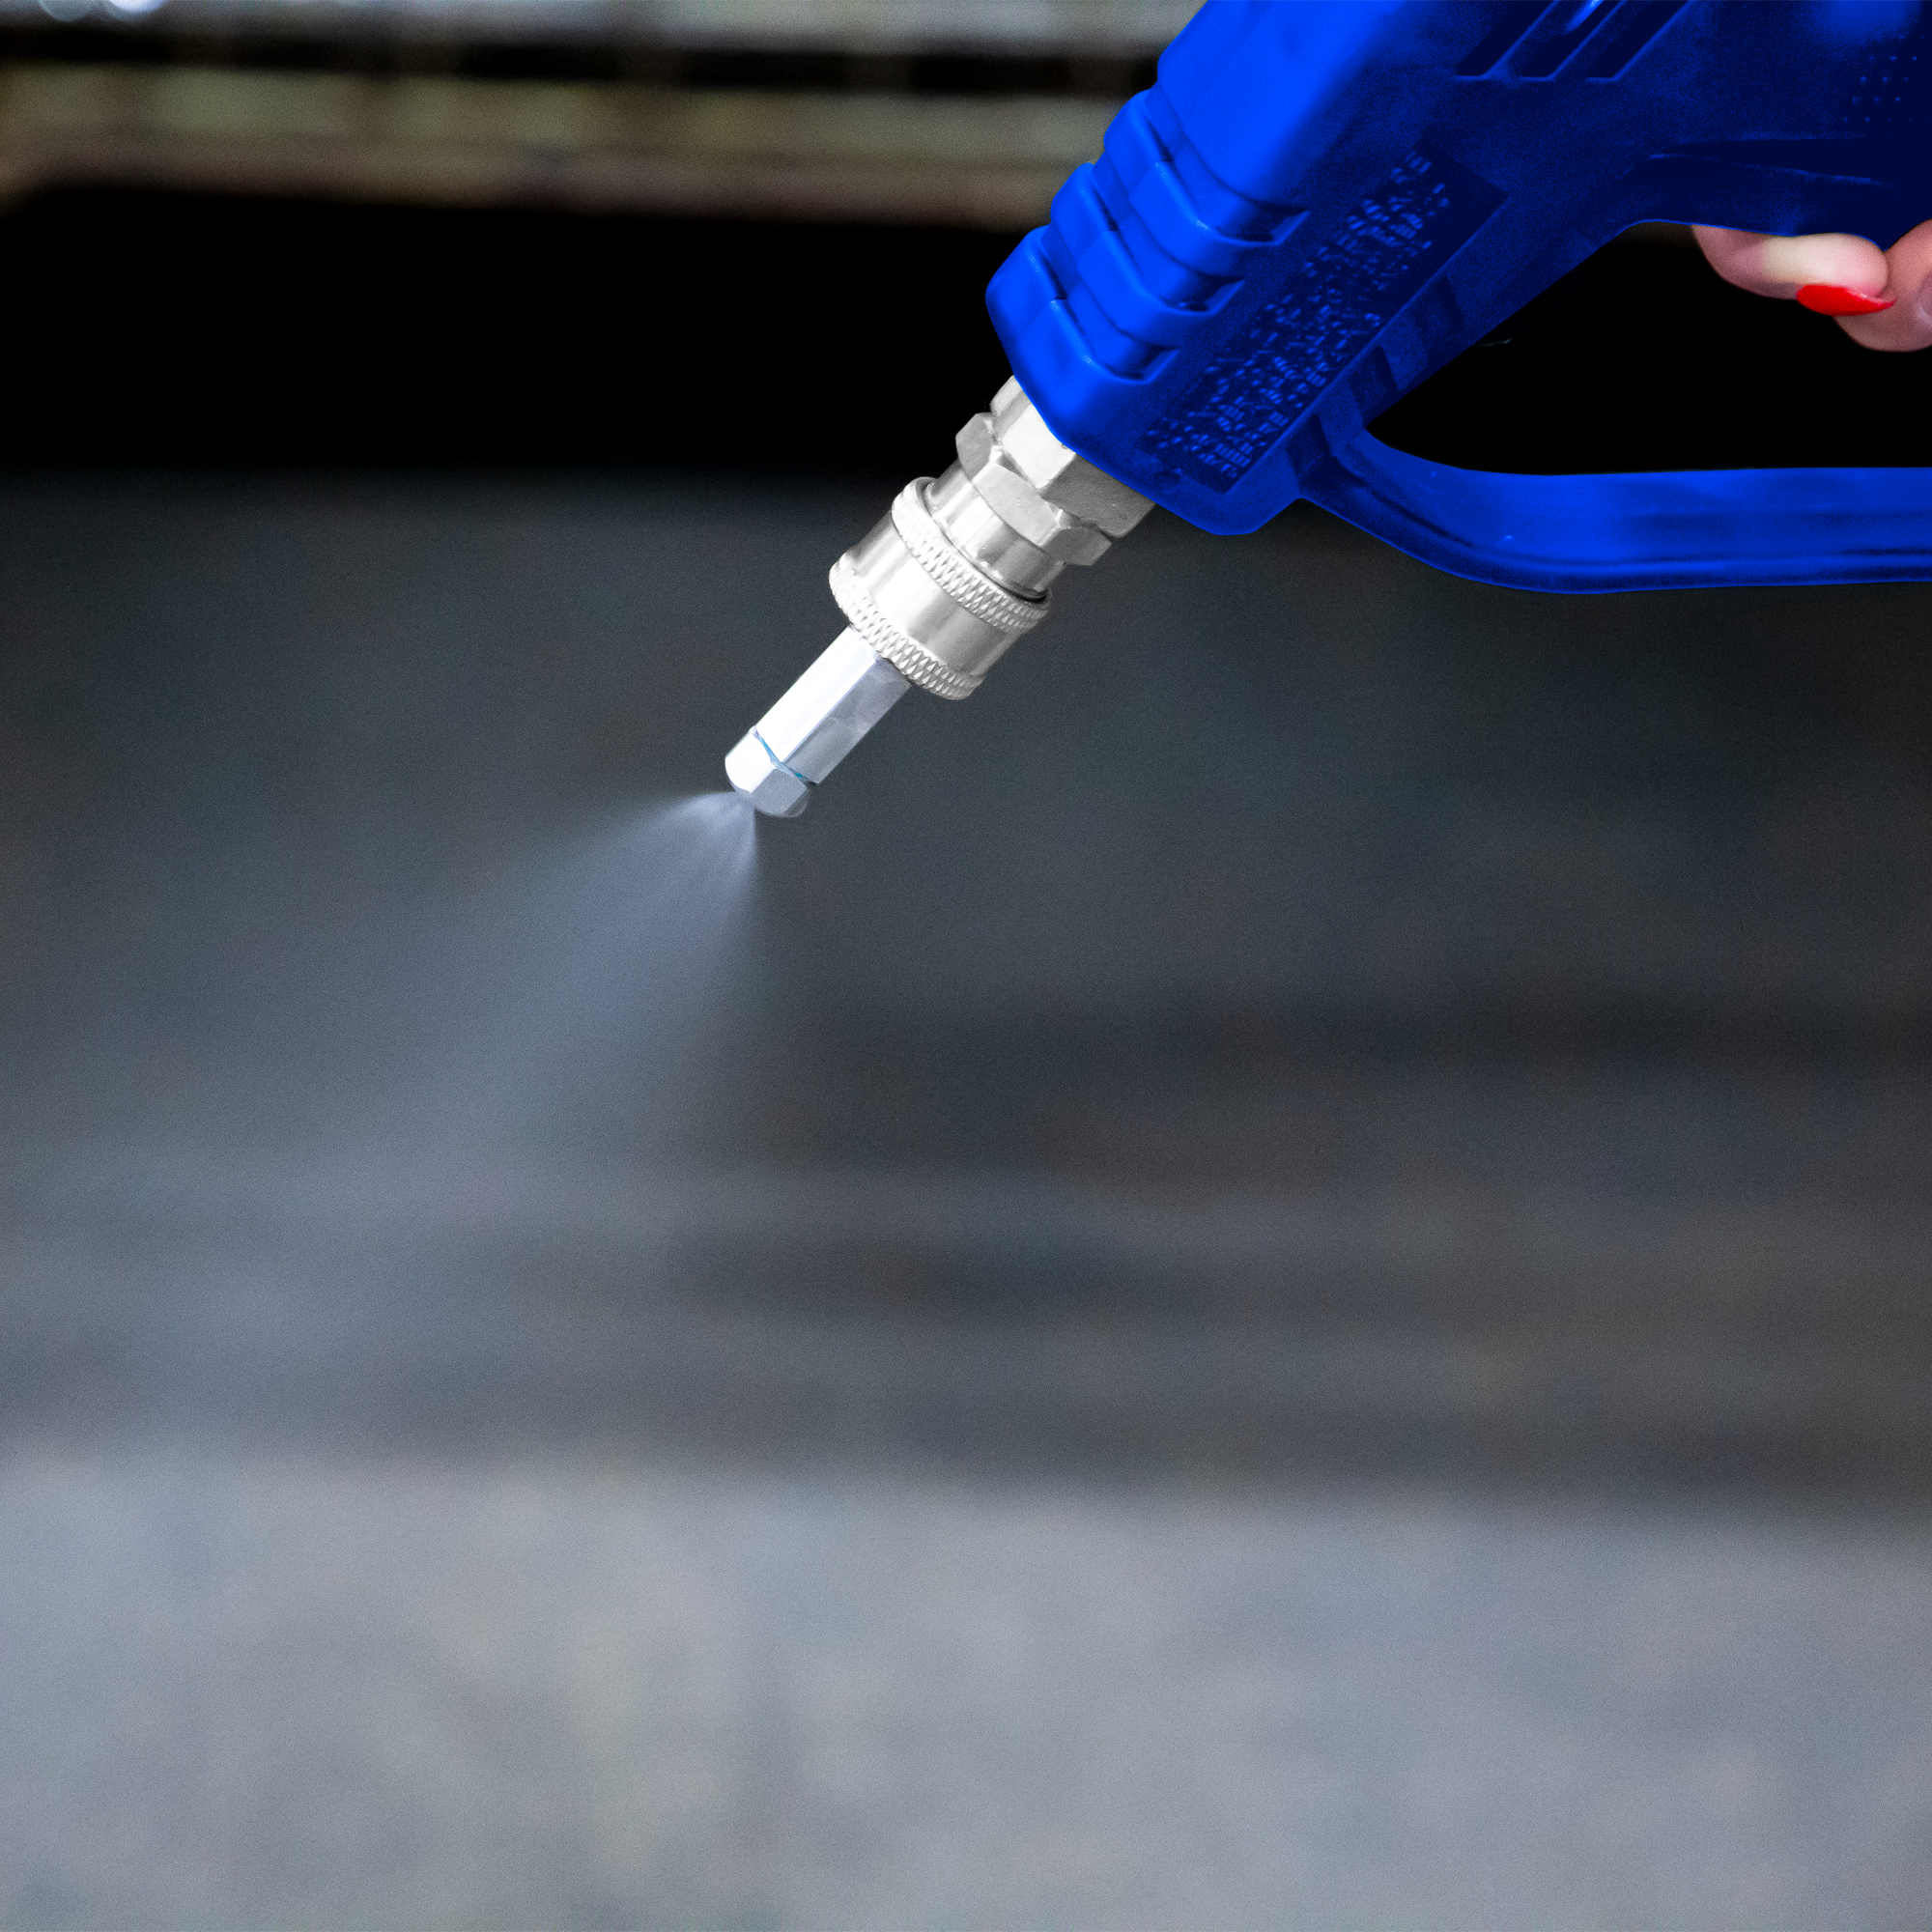 X-Stream Clean 80-micron nozzle spraying upclose